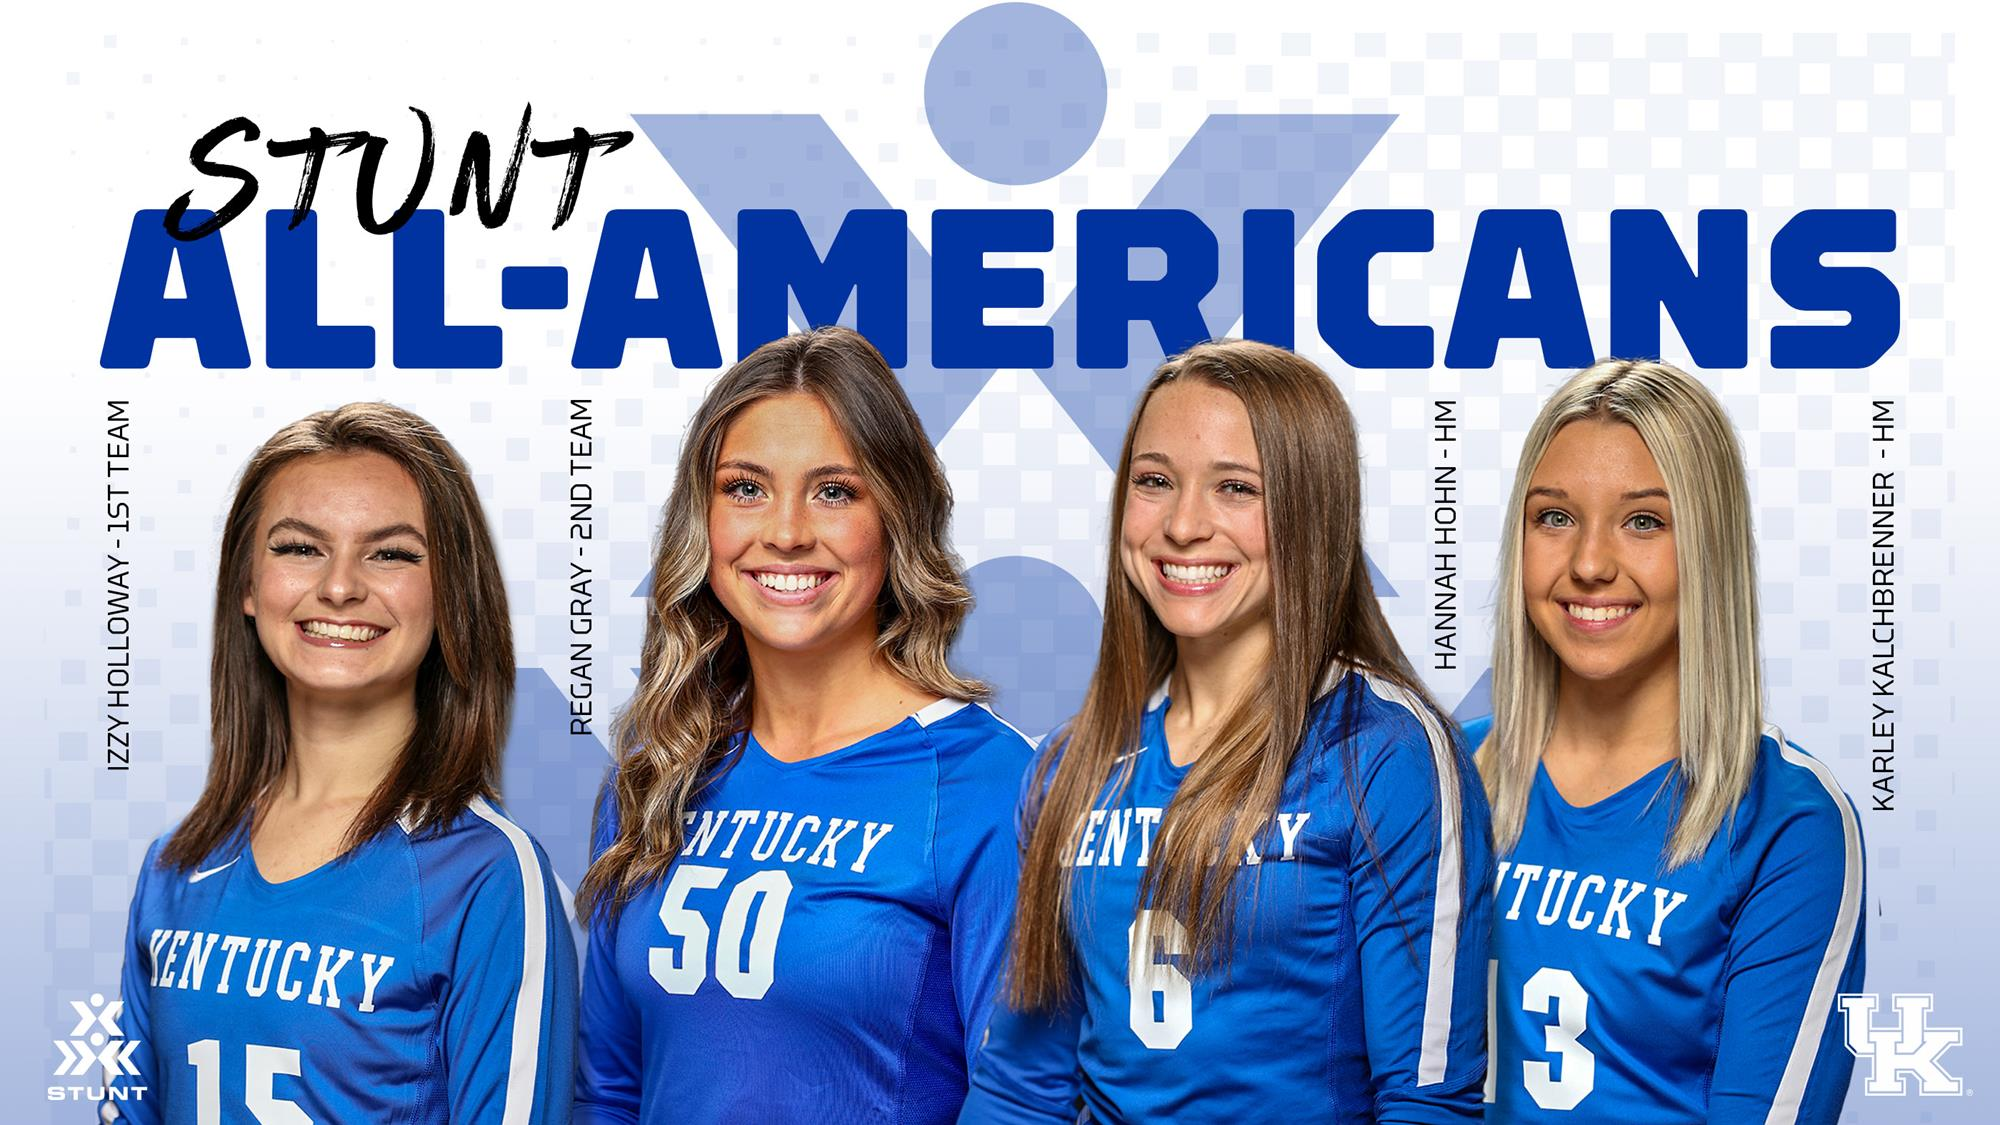 Kentucky STUNT Places Four on All-American Team